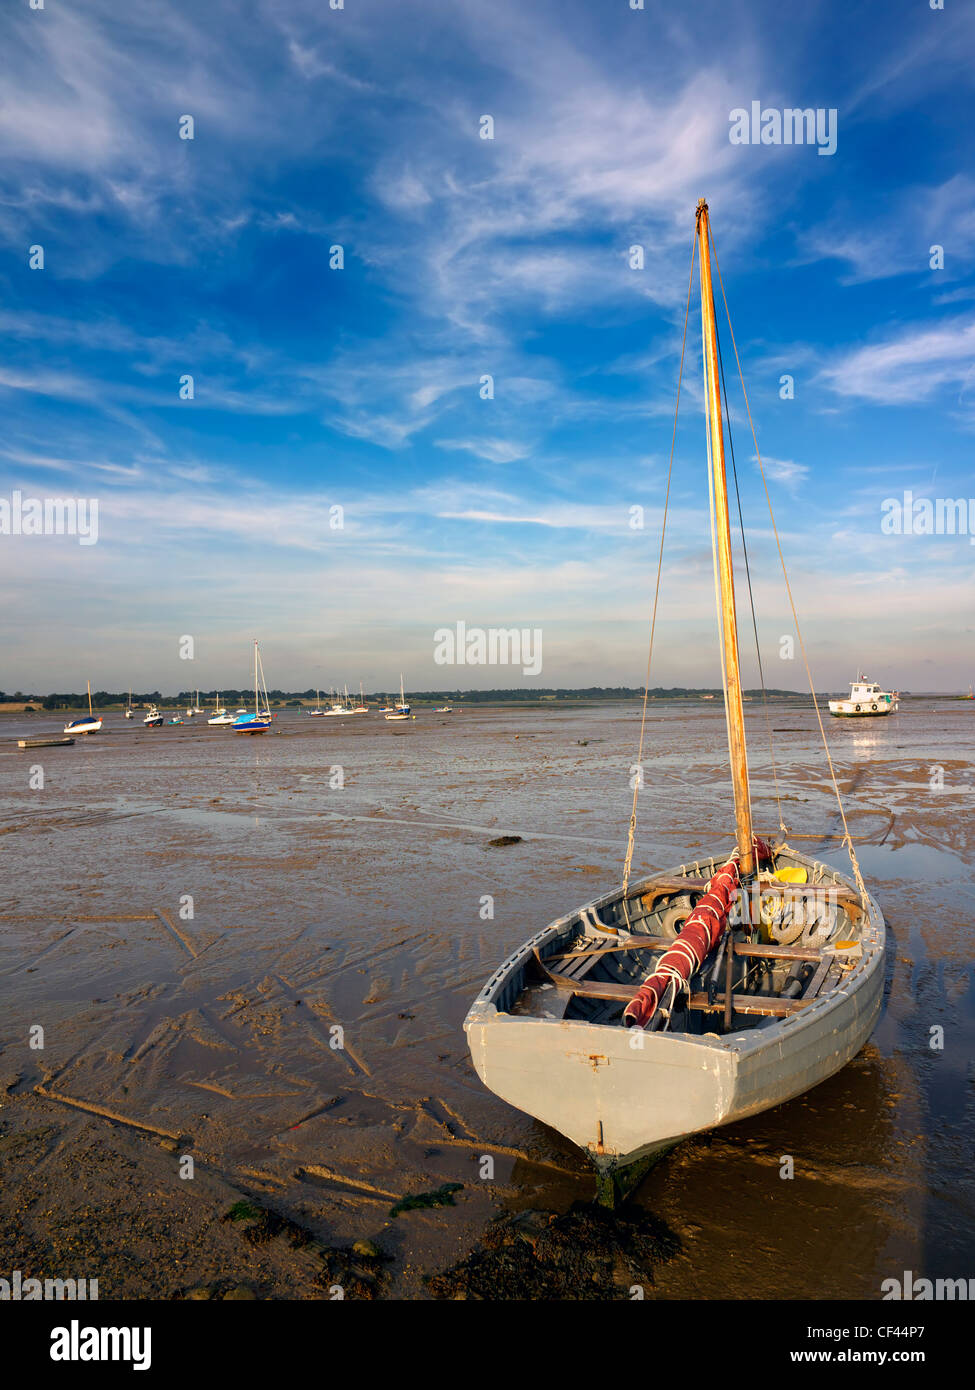 Low tide on the River Stour at Manningtree. Manningtree is known as the ...